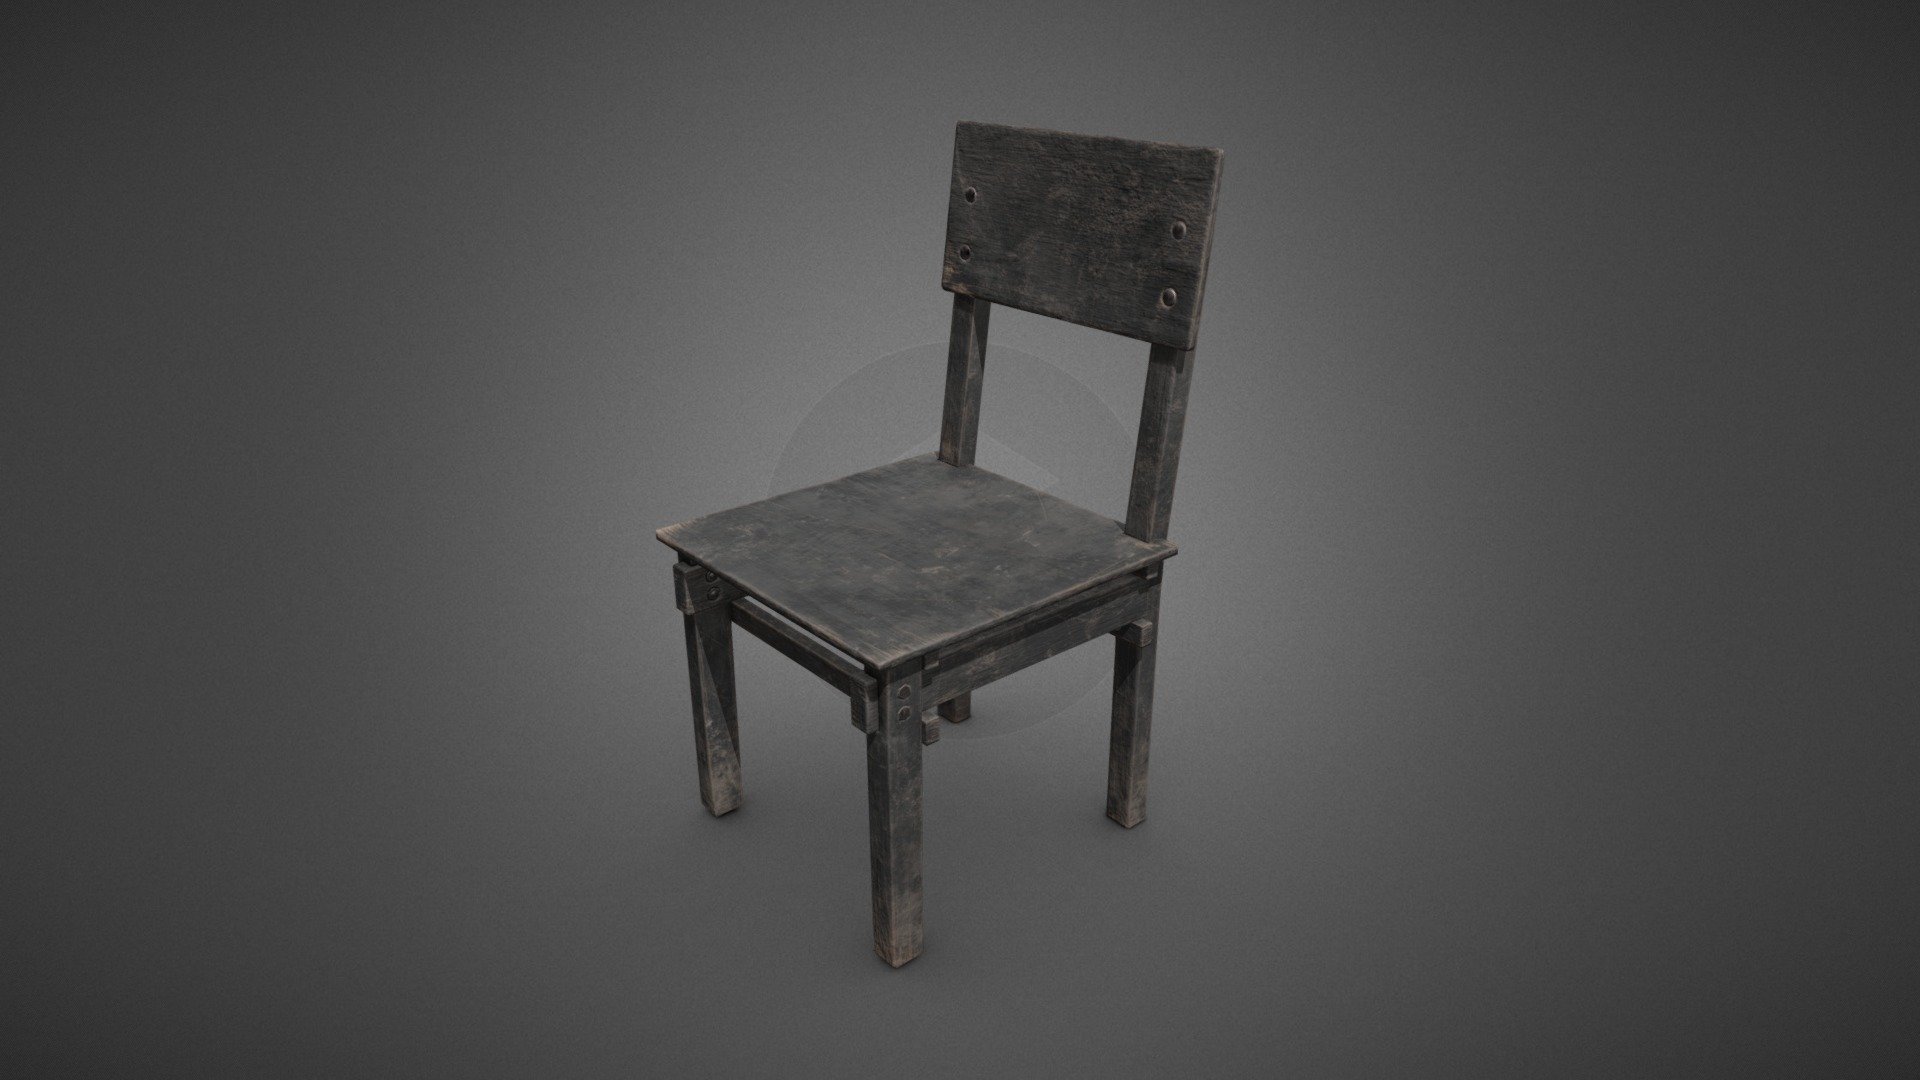 Game-ready model of an old wooden chair (Low-Poly).

TEXTURES

High resolution PBR Metal/Roughness textures are provided in the additional files.

Texture size: 2048 x 2048
Texture format: PNG 8 bit (uncompressed)




Base Color (Diffuse)

Metallic

Roughness

Height

Normal 

Ambient Occlusion

This asset is part of our Hangar collection - Old Chair - Buy Royalty Free 3D model by Ringtail Studios (@ringtail) 3d model